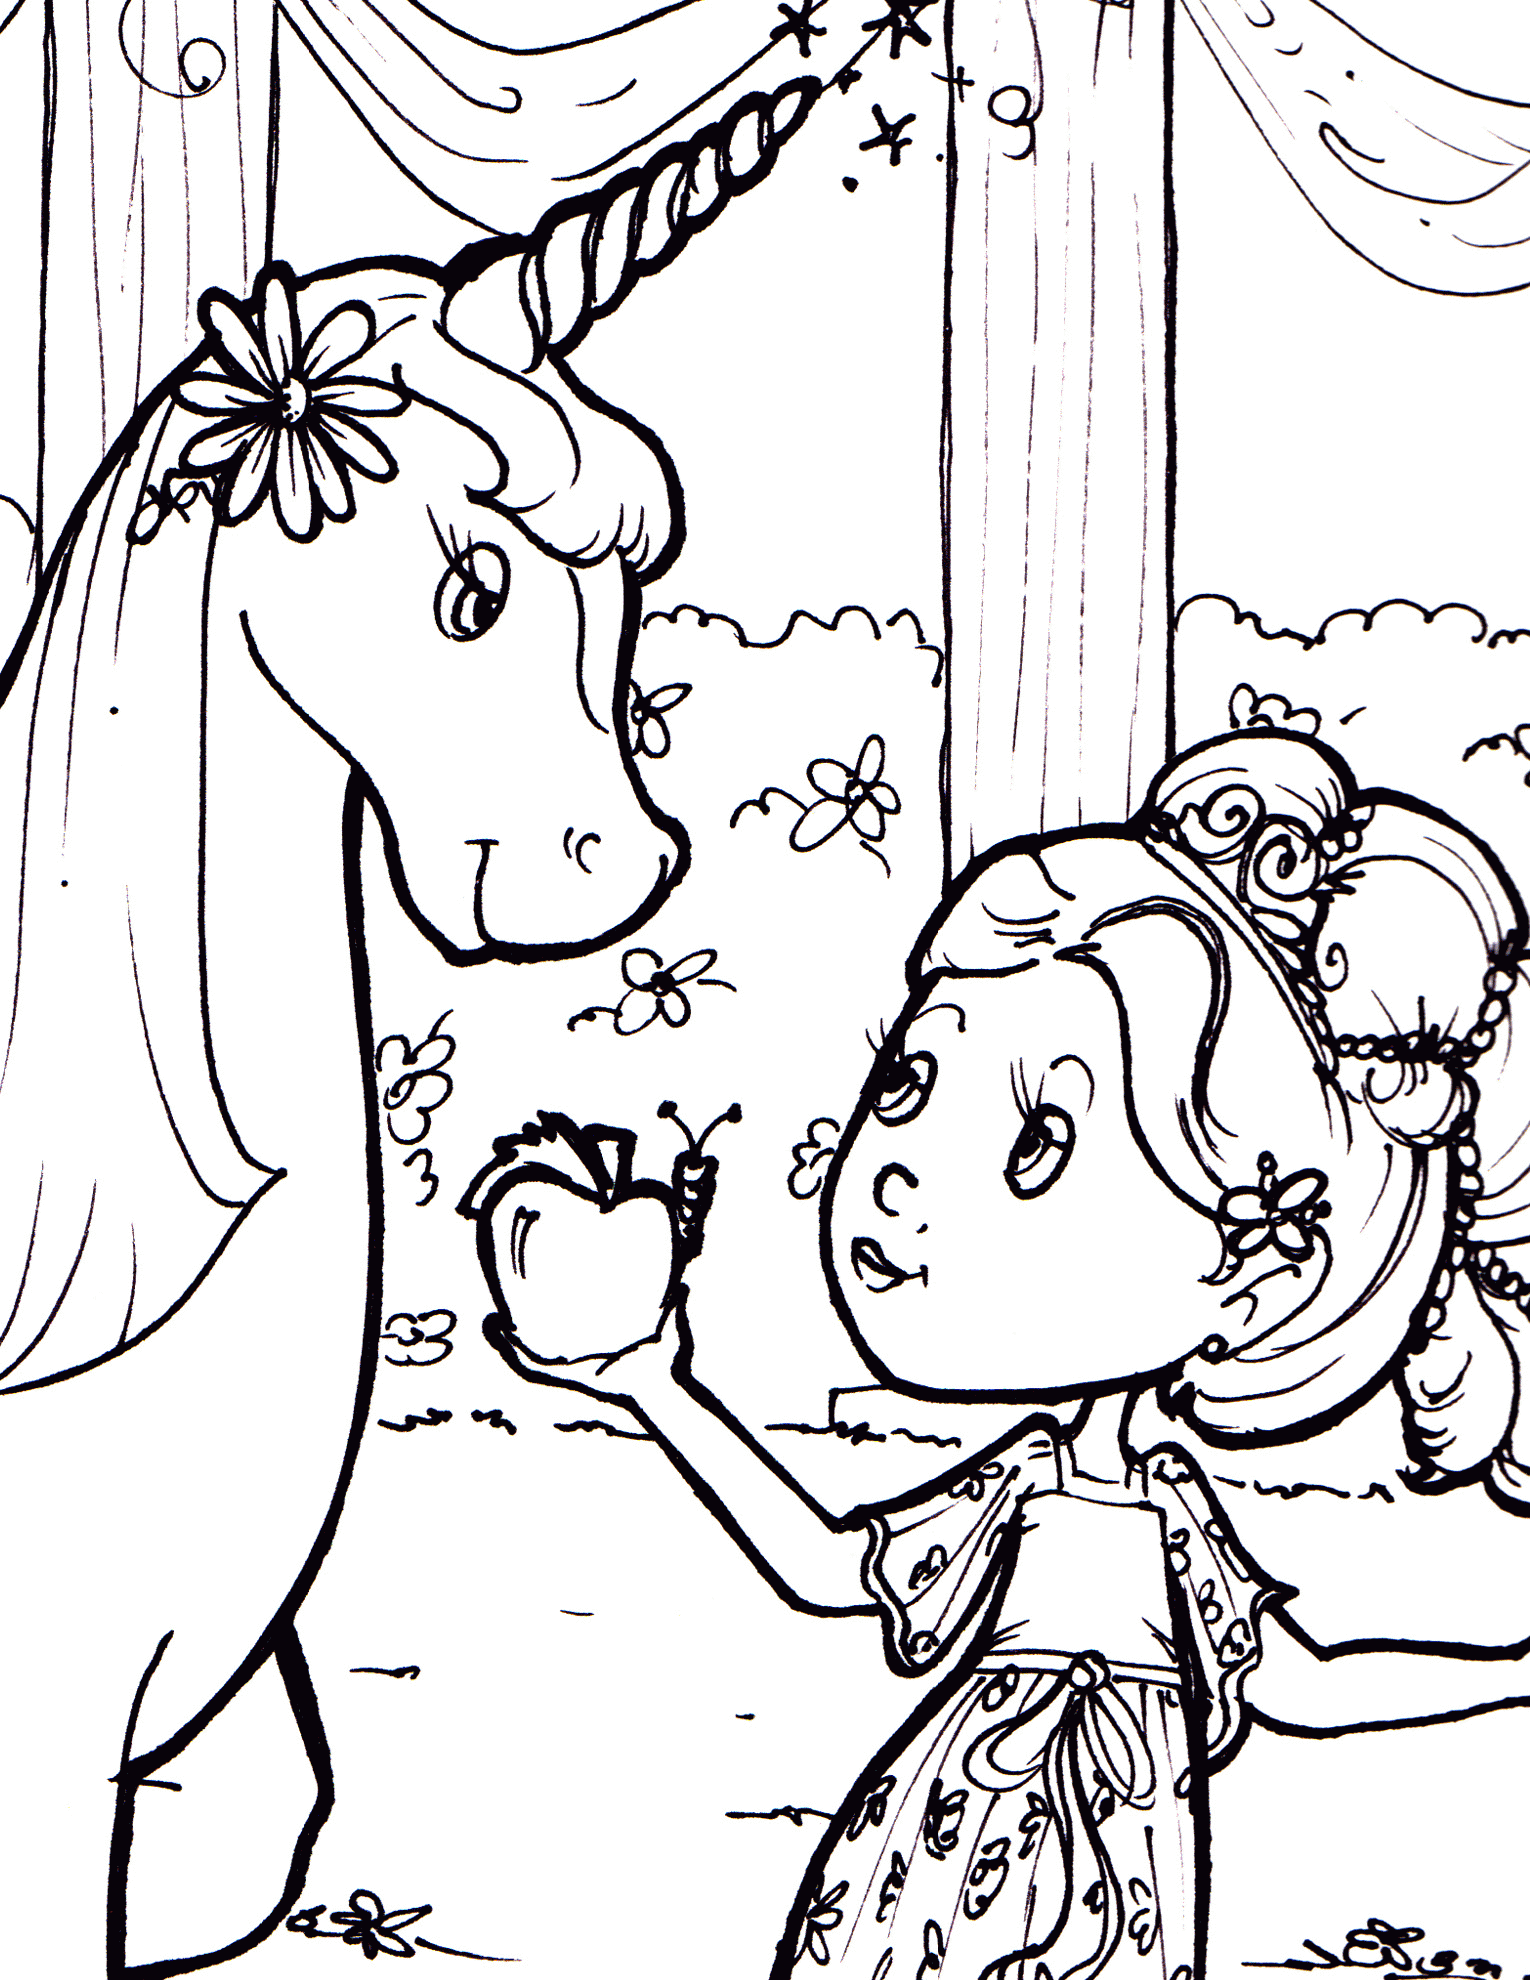 free-princess-unicorn-coloring-pages-download-free-princess-unicorn